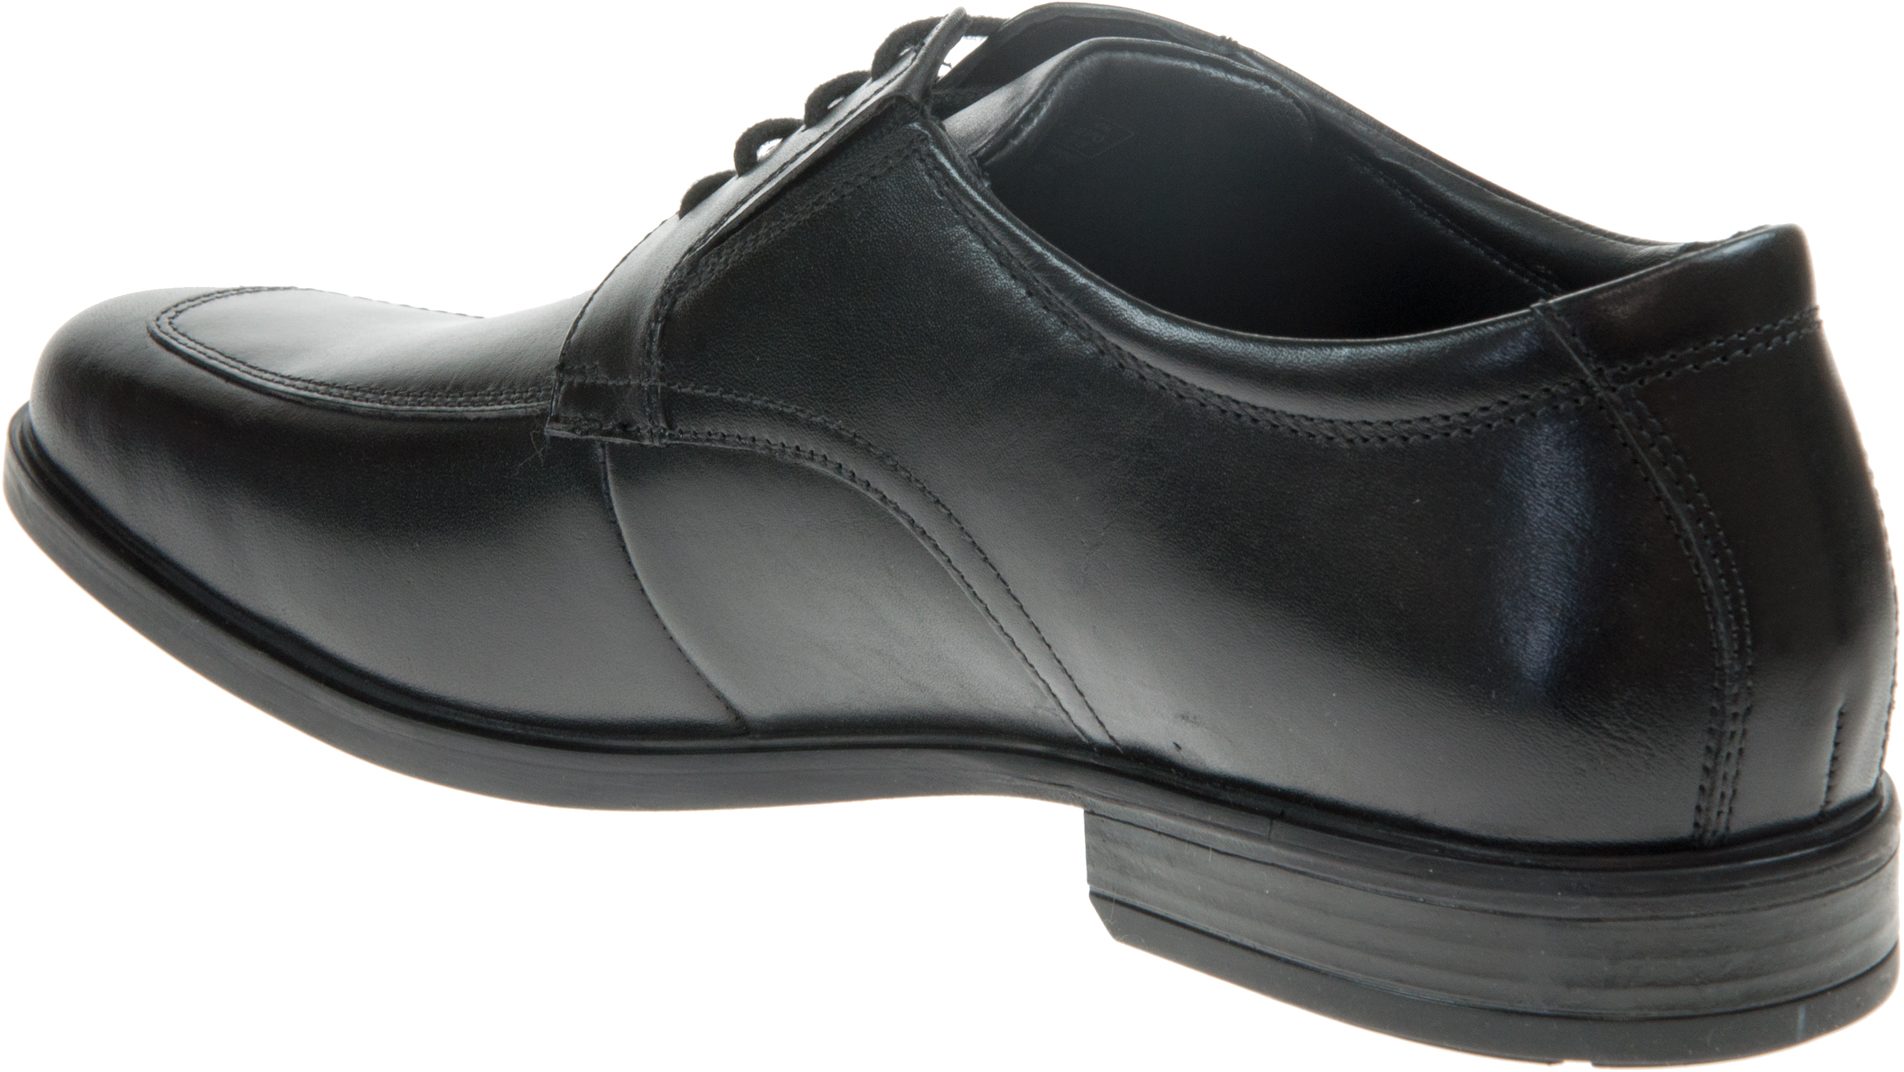 Clarks Howard Apron Black Leather 26162177 - Formal Shoes - Humphries Shoes